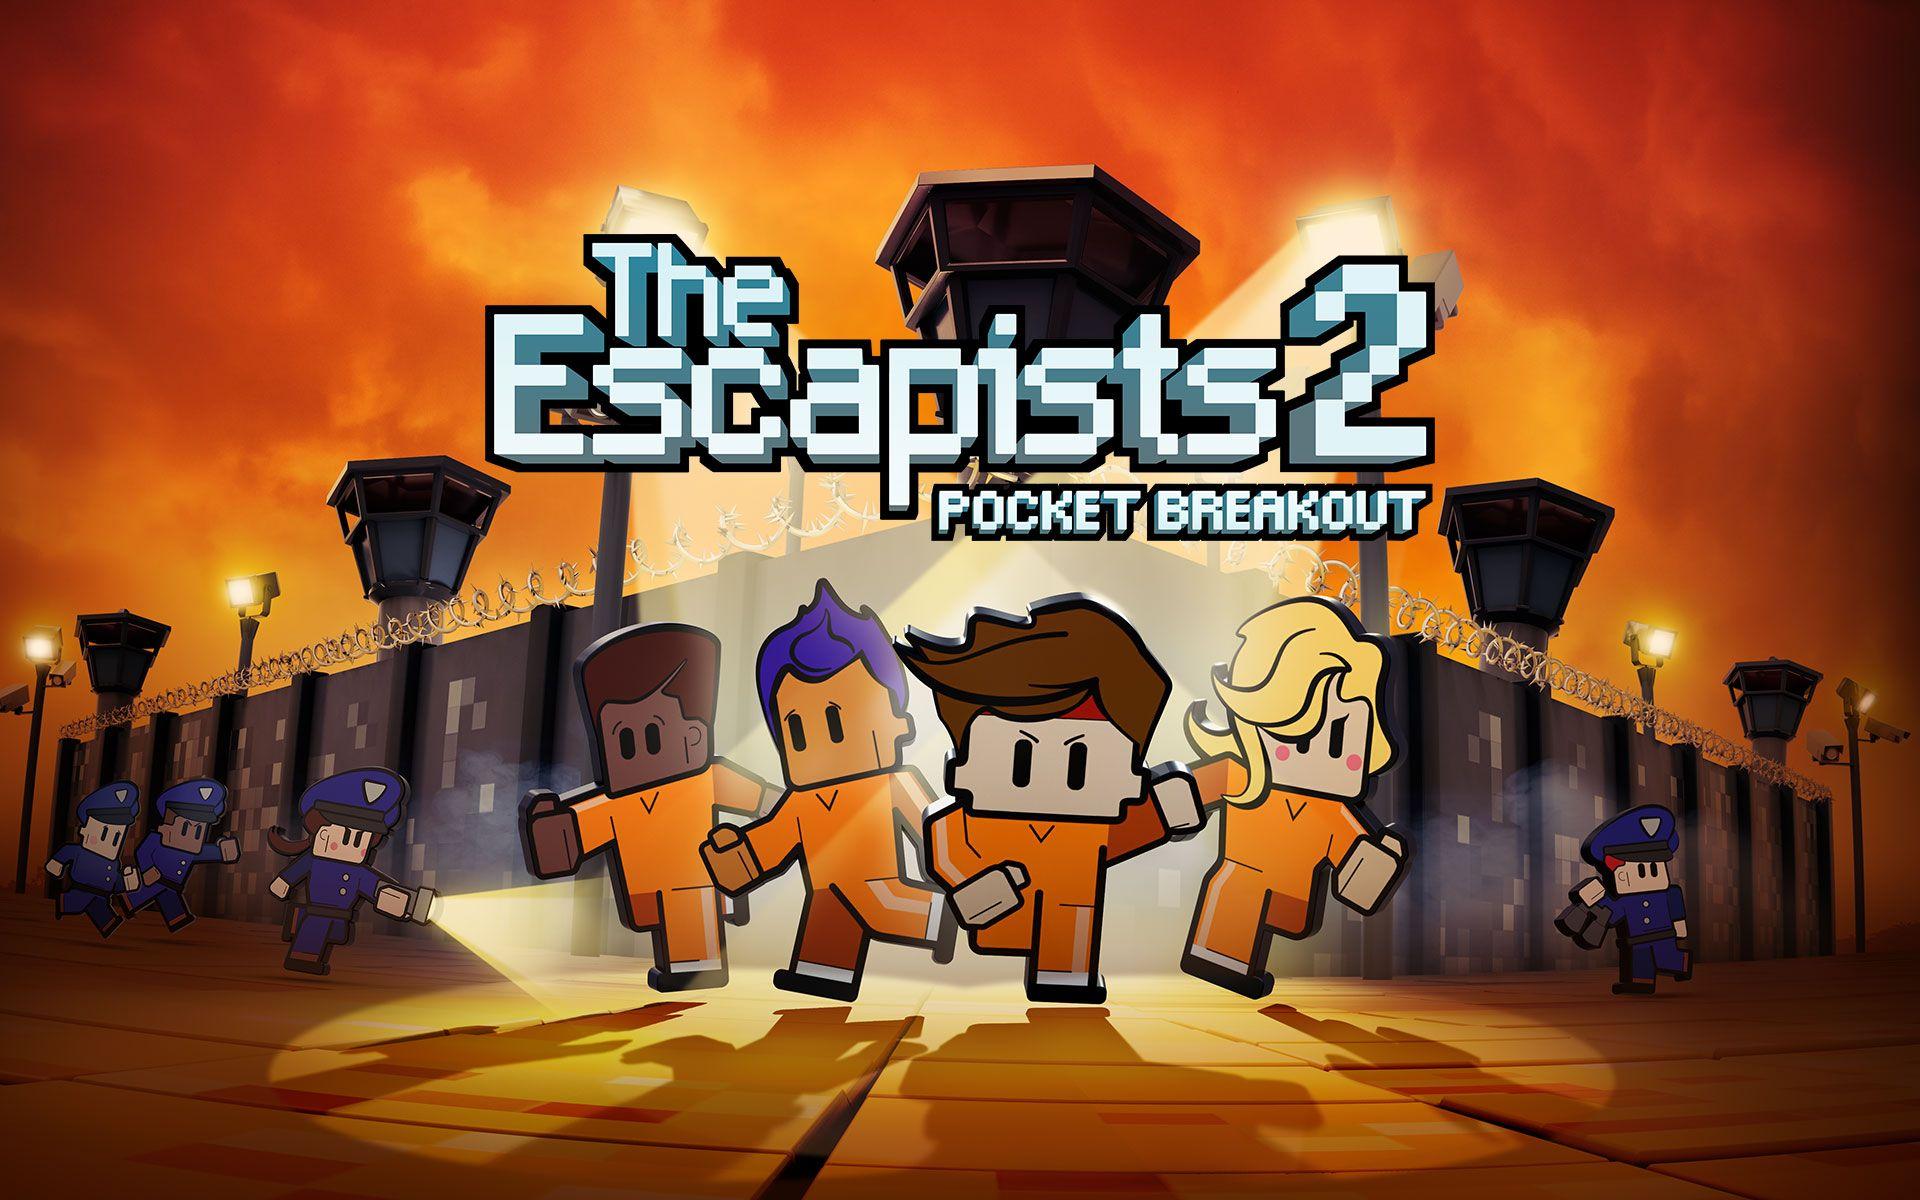 The Escapists 2 is heading to mobile! Group PLC